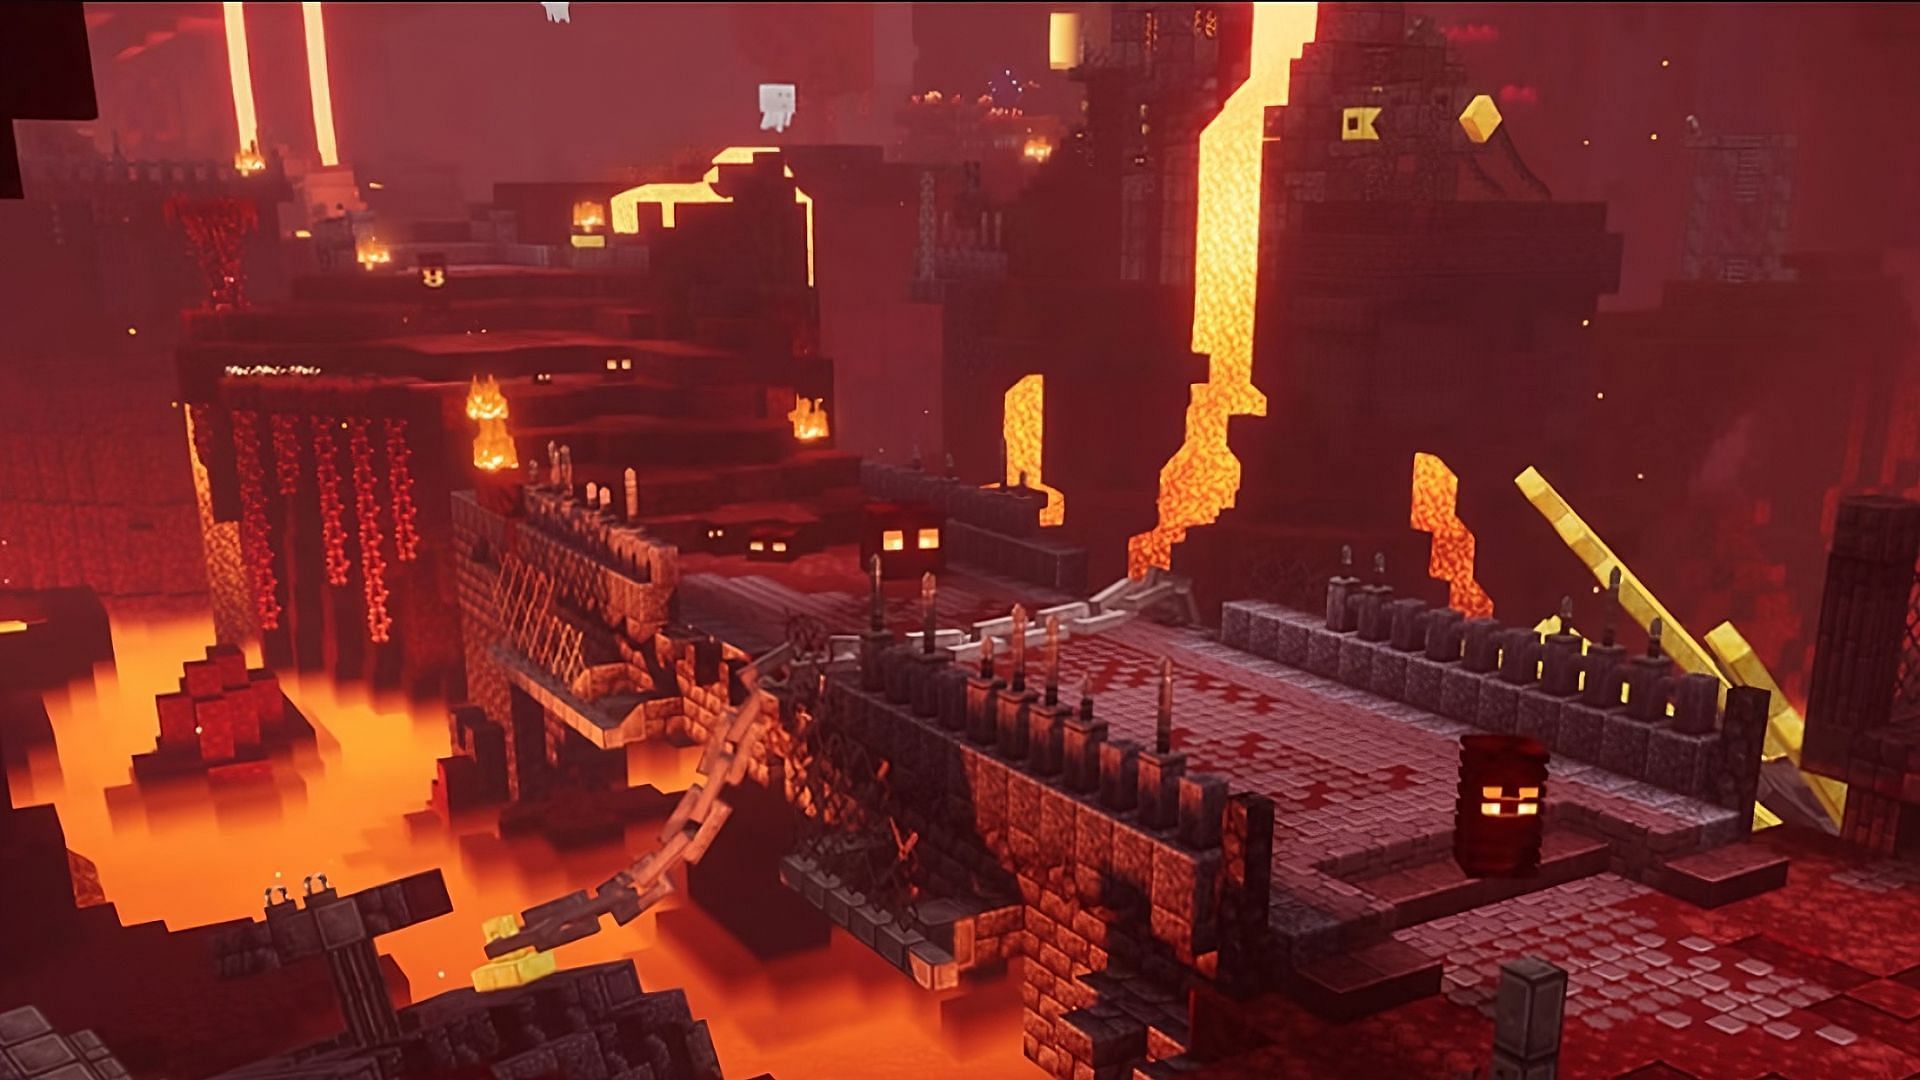 The Nether is an inhospitable place in Minecraft, but it has plenty of riches as well (Image via Mojang)